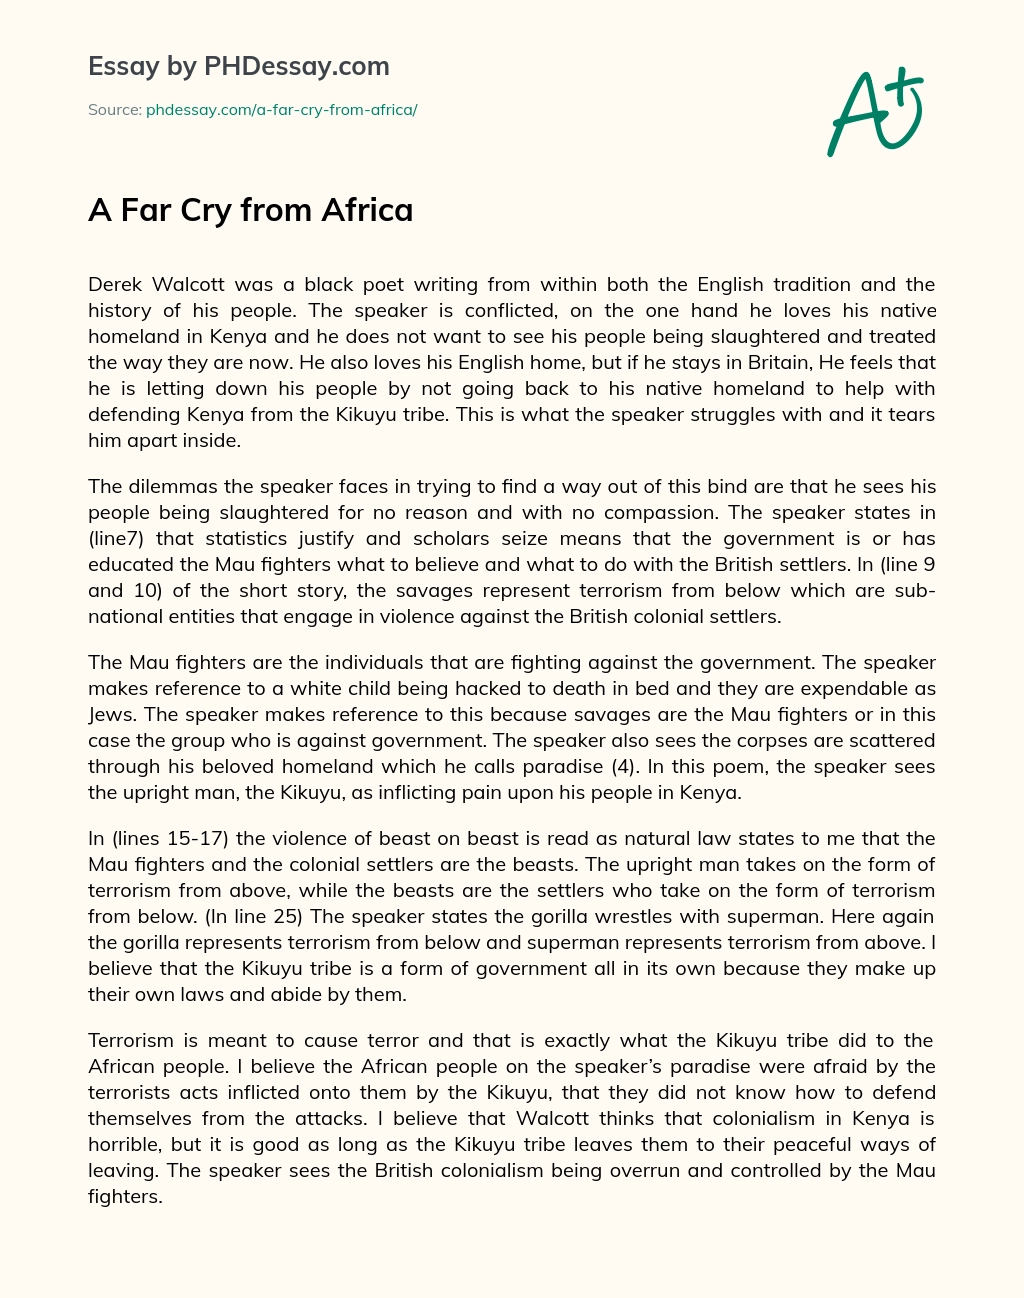 A Far Cry from Africa essay